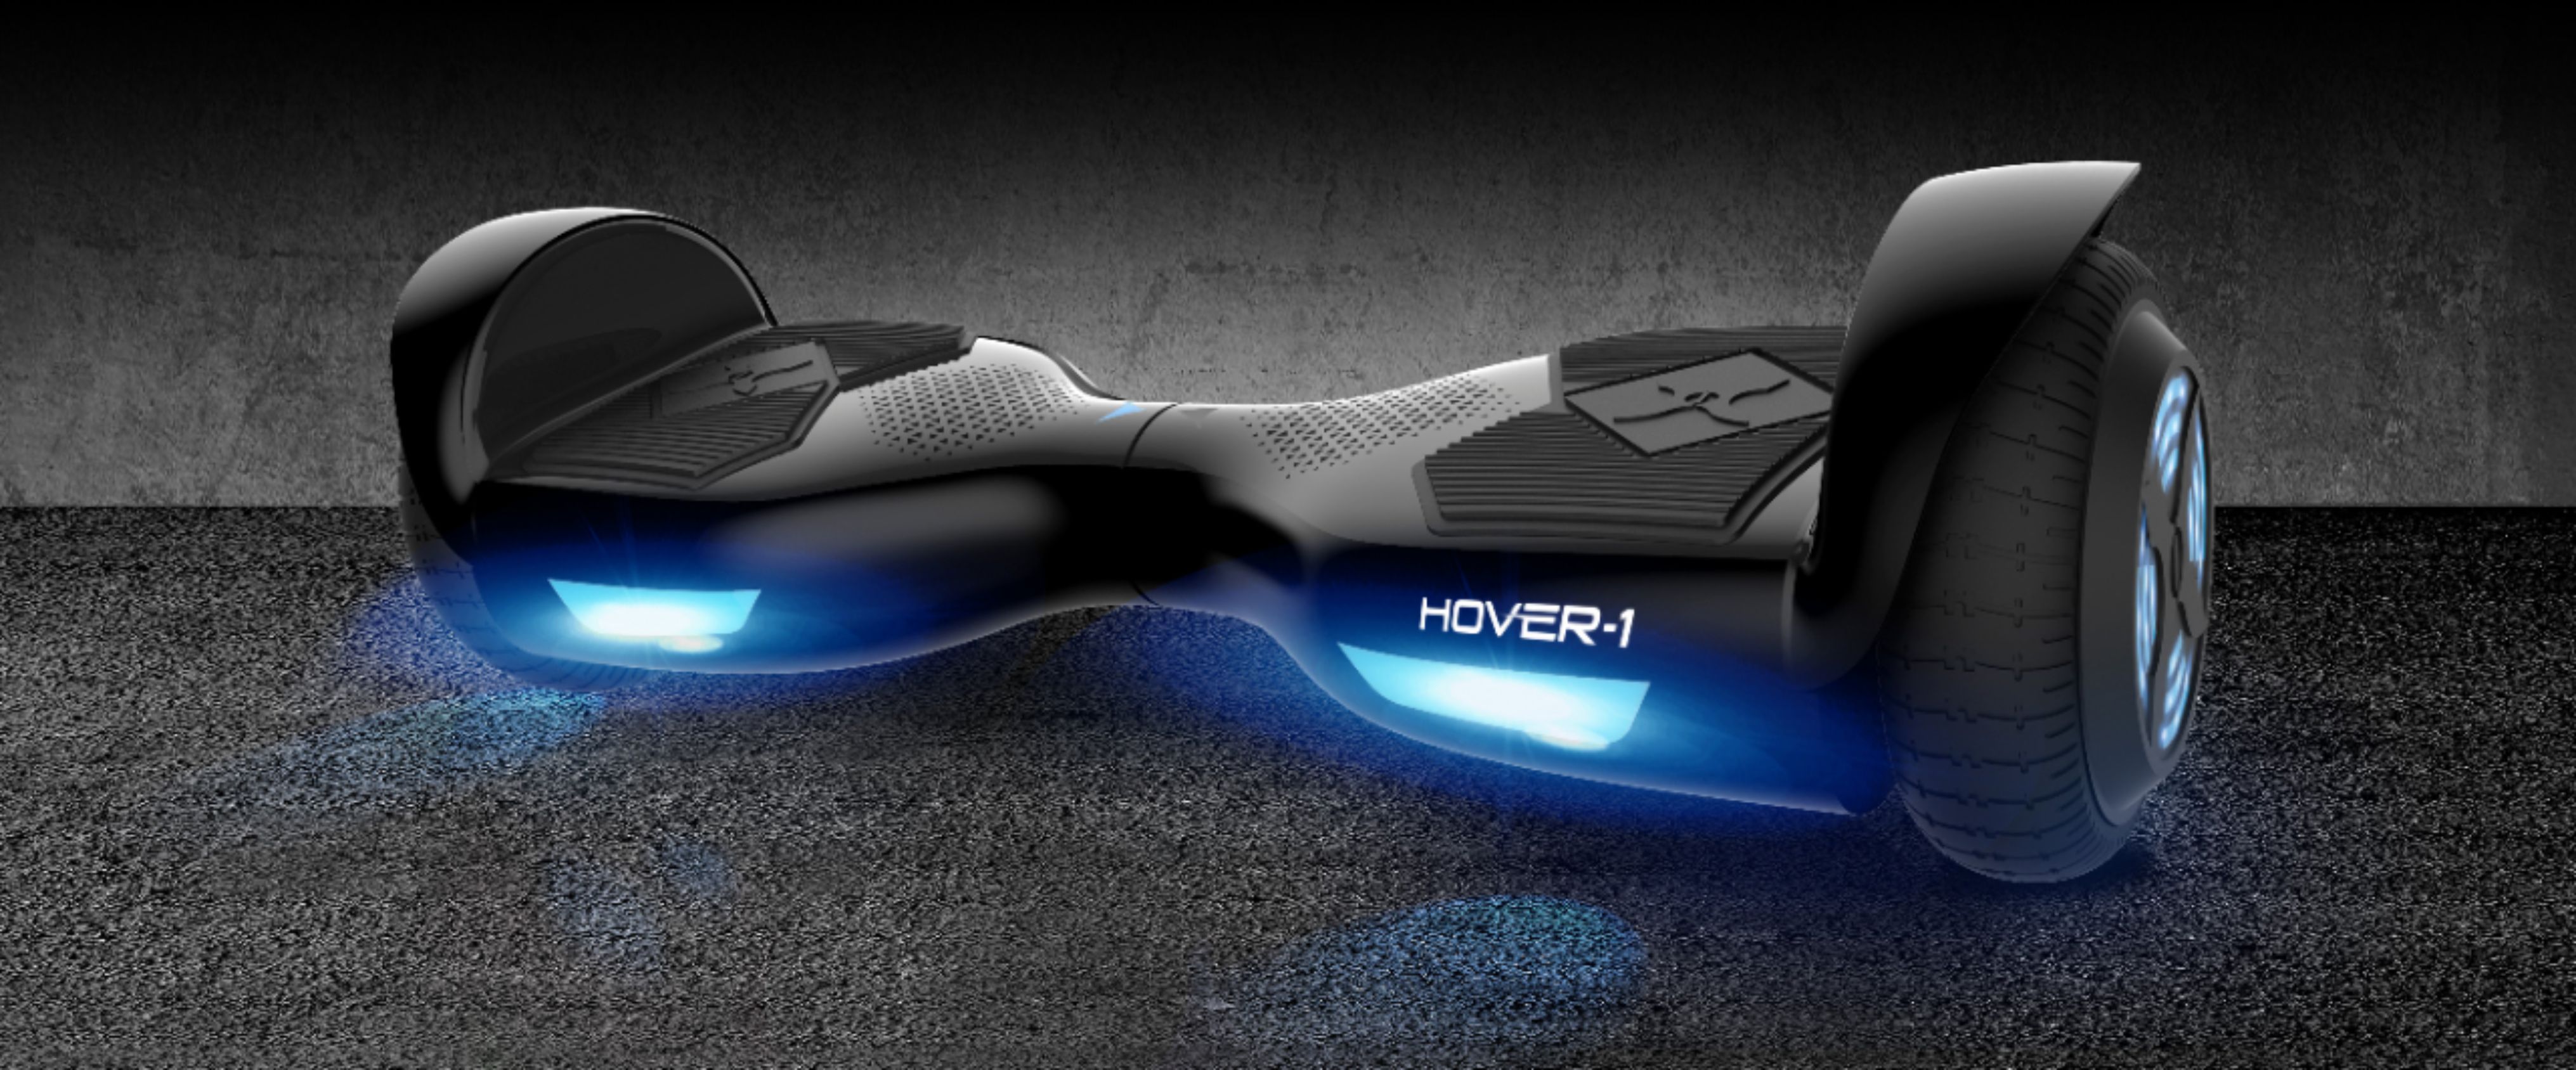 Hover-1 Helix Self-Balancing Scooter 